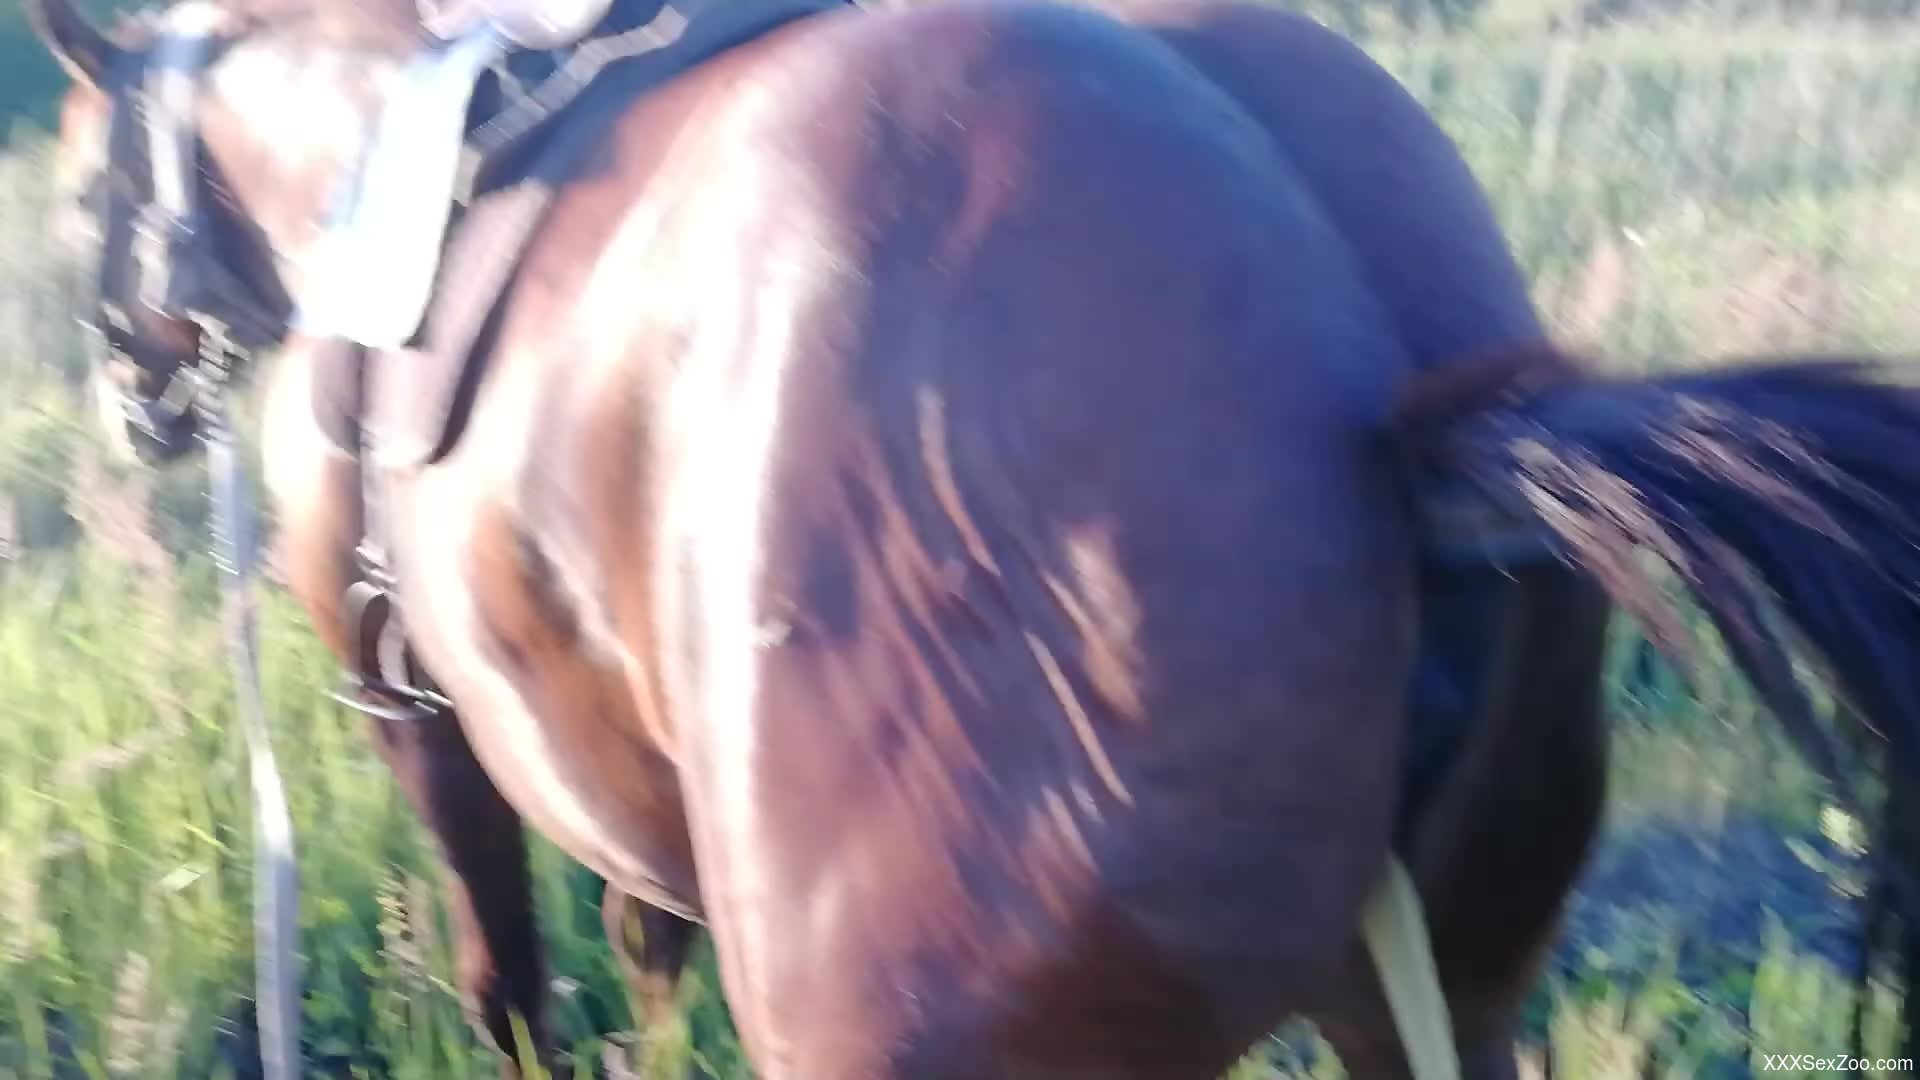 Sexy horse showing off its oozing pussy on camera - XXXSexZoo.com